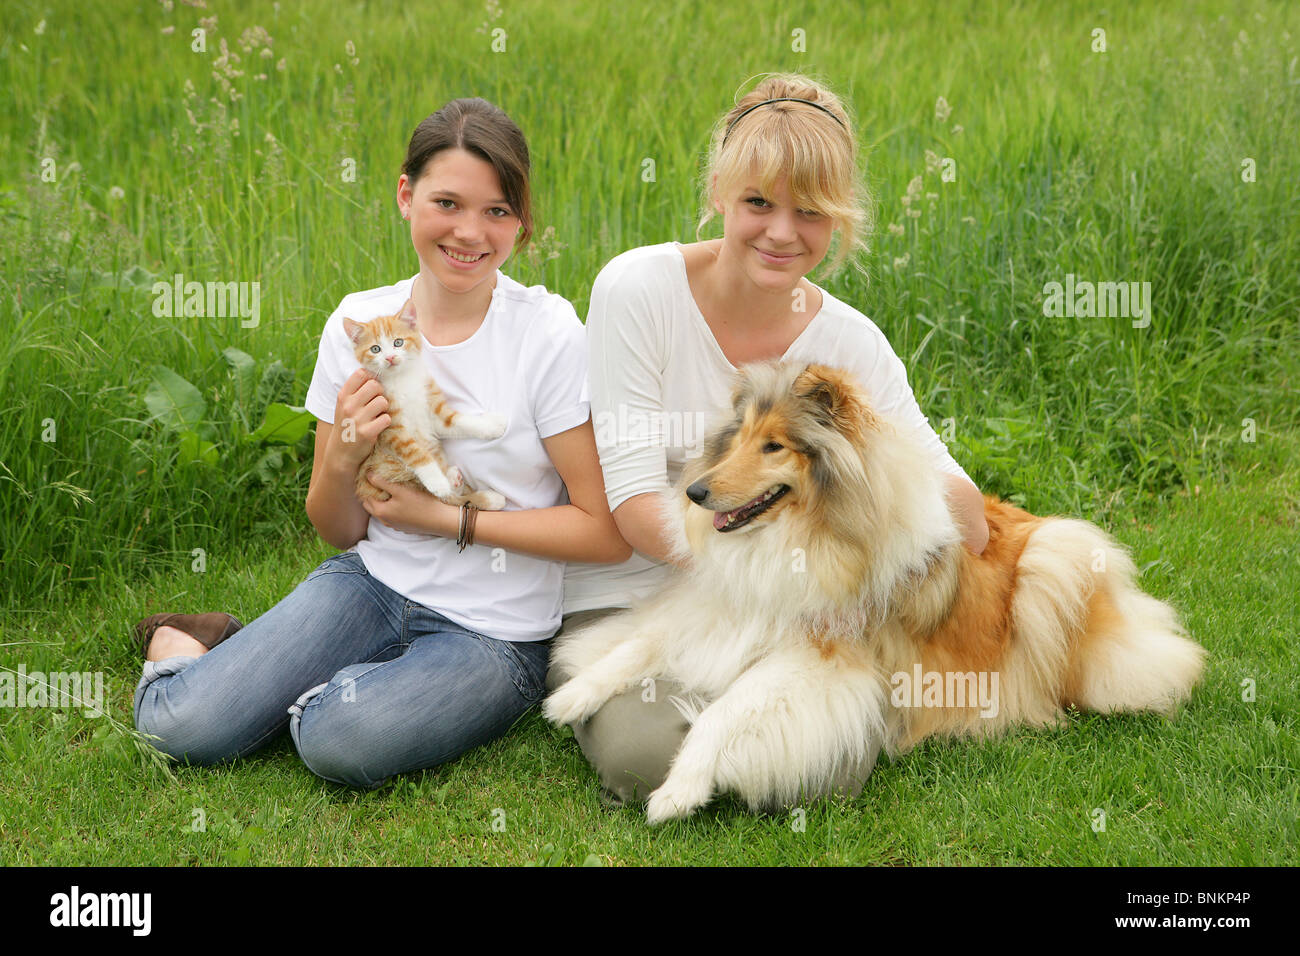 two girls with kitten and Collie dog Stock Photo